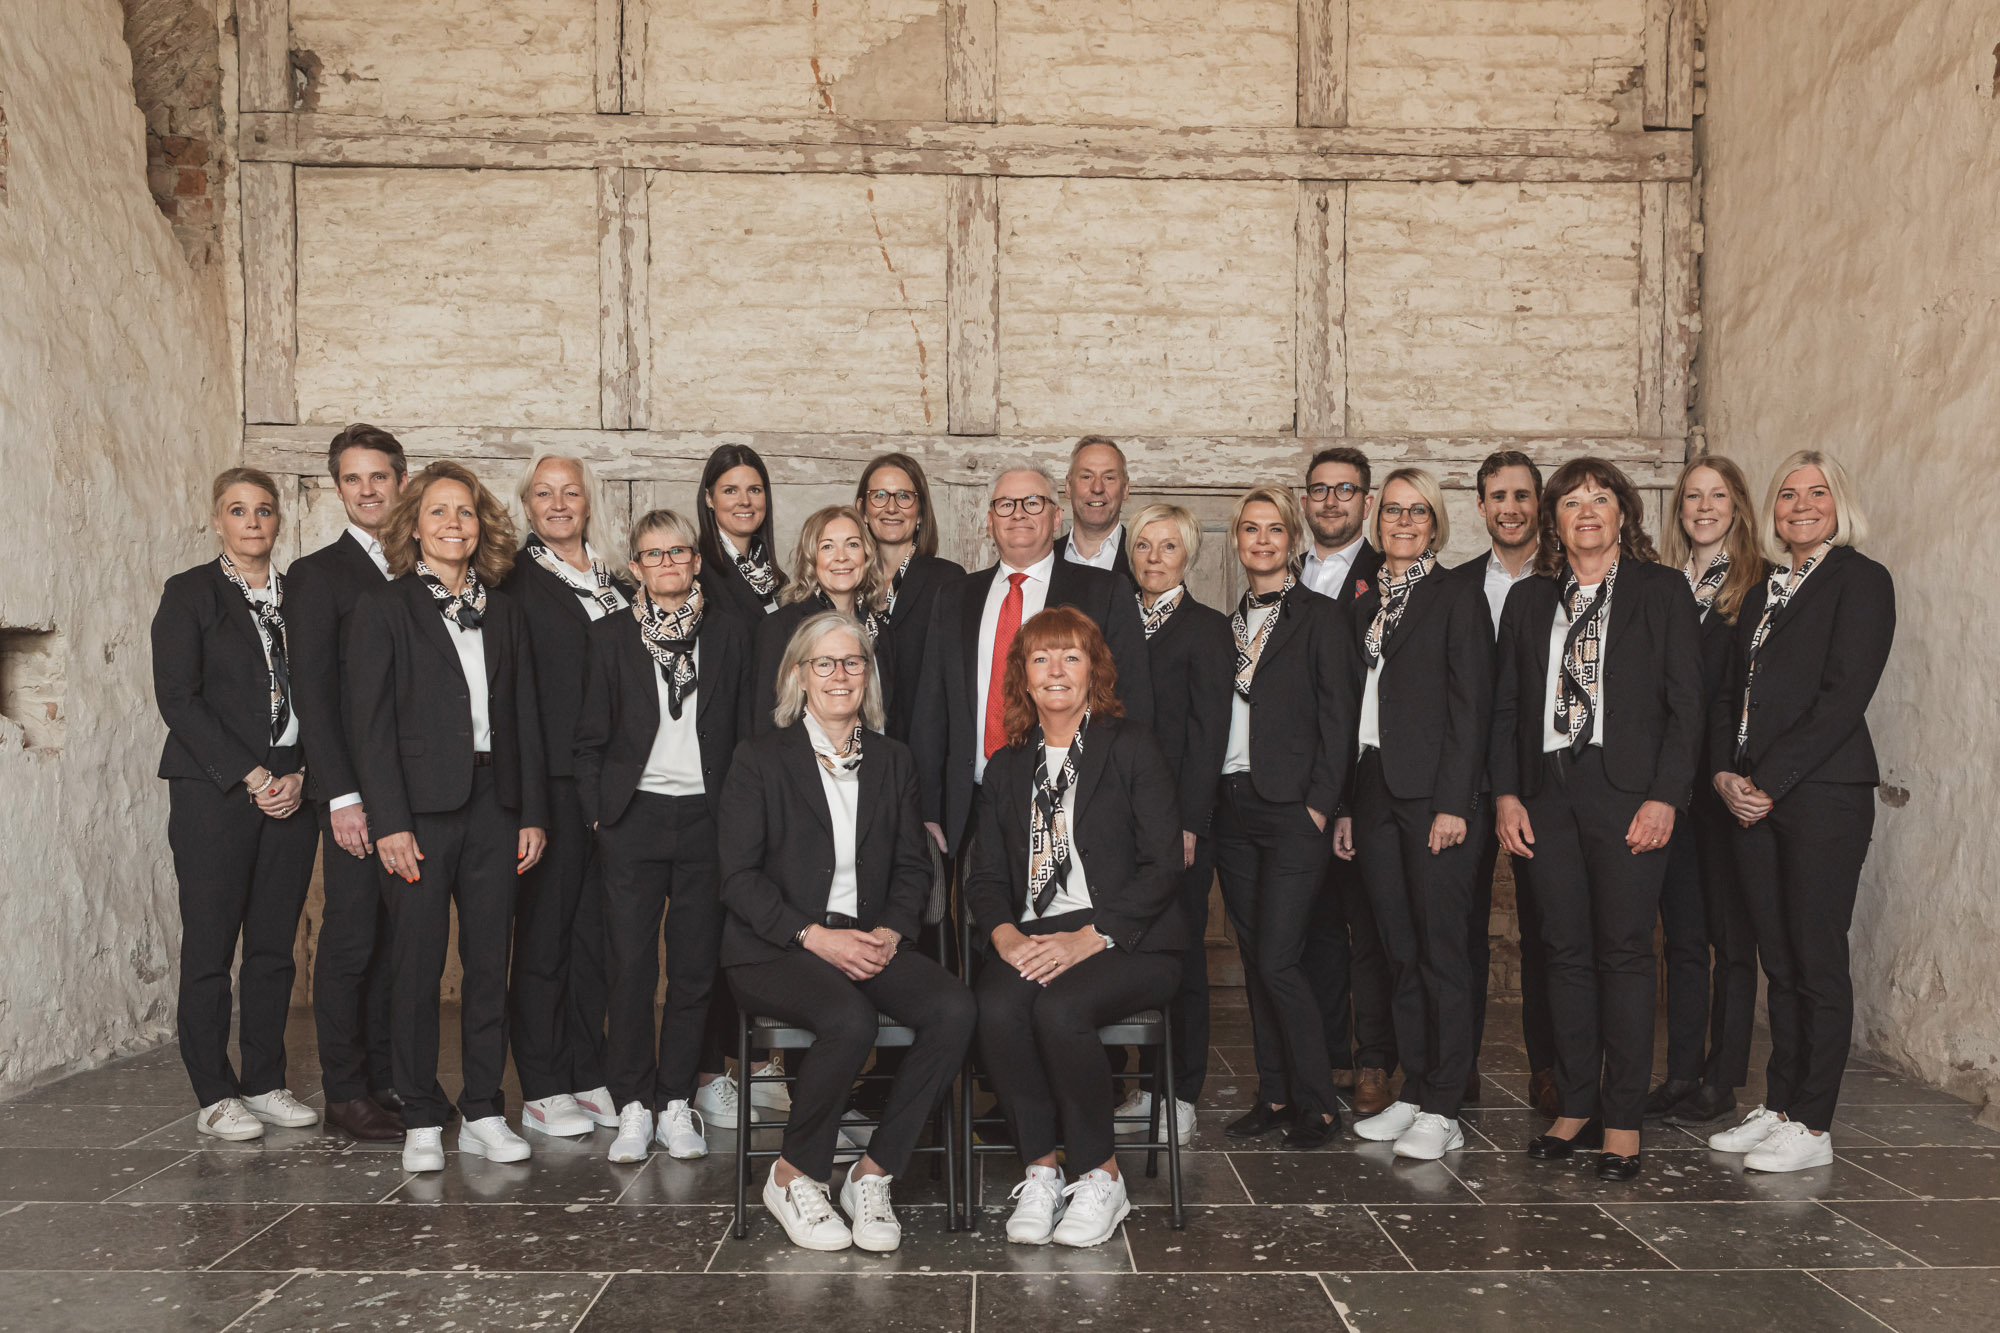 Group picture of the staff in Vadstena Sparbank